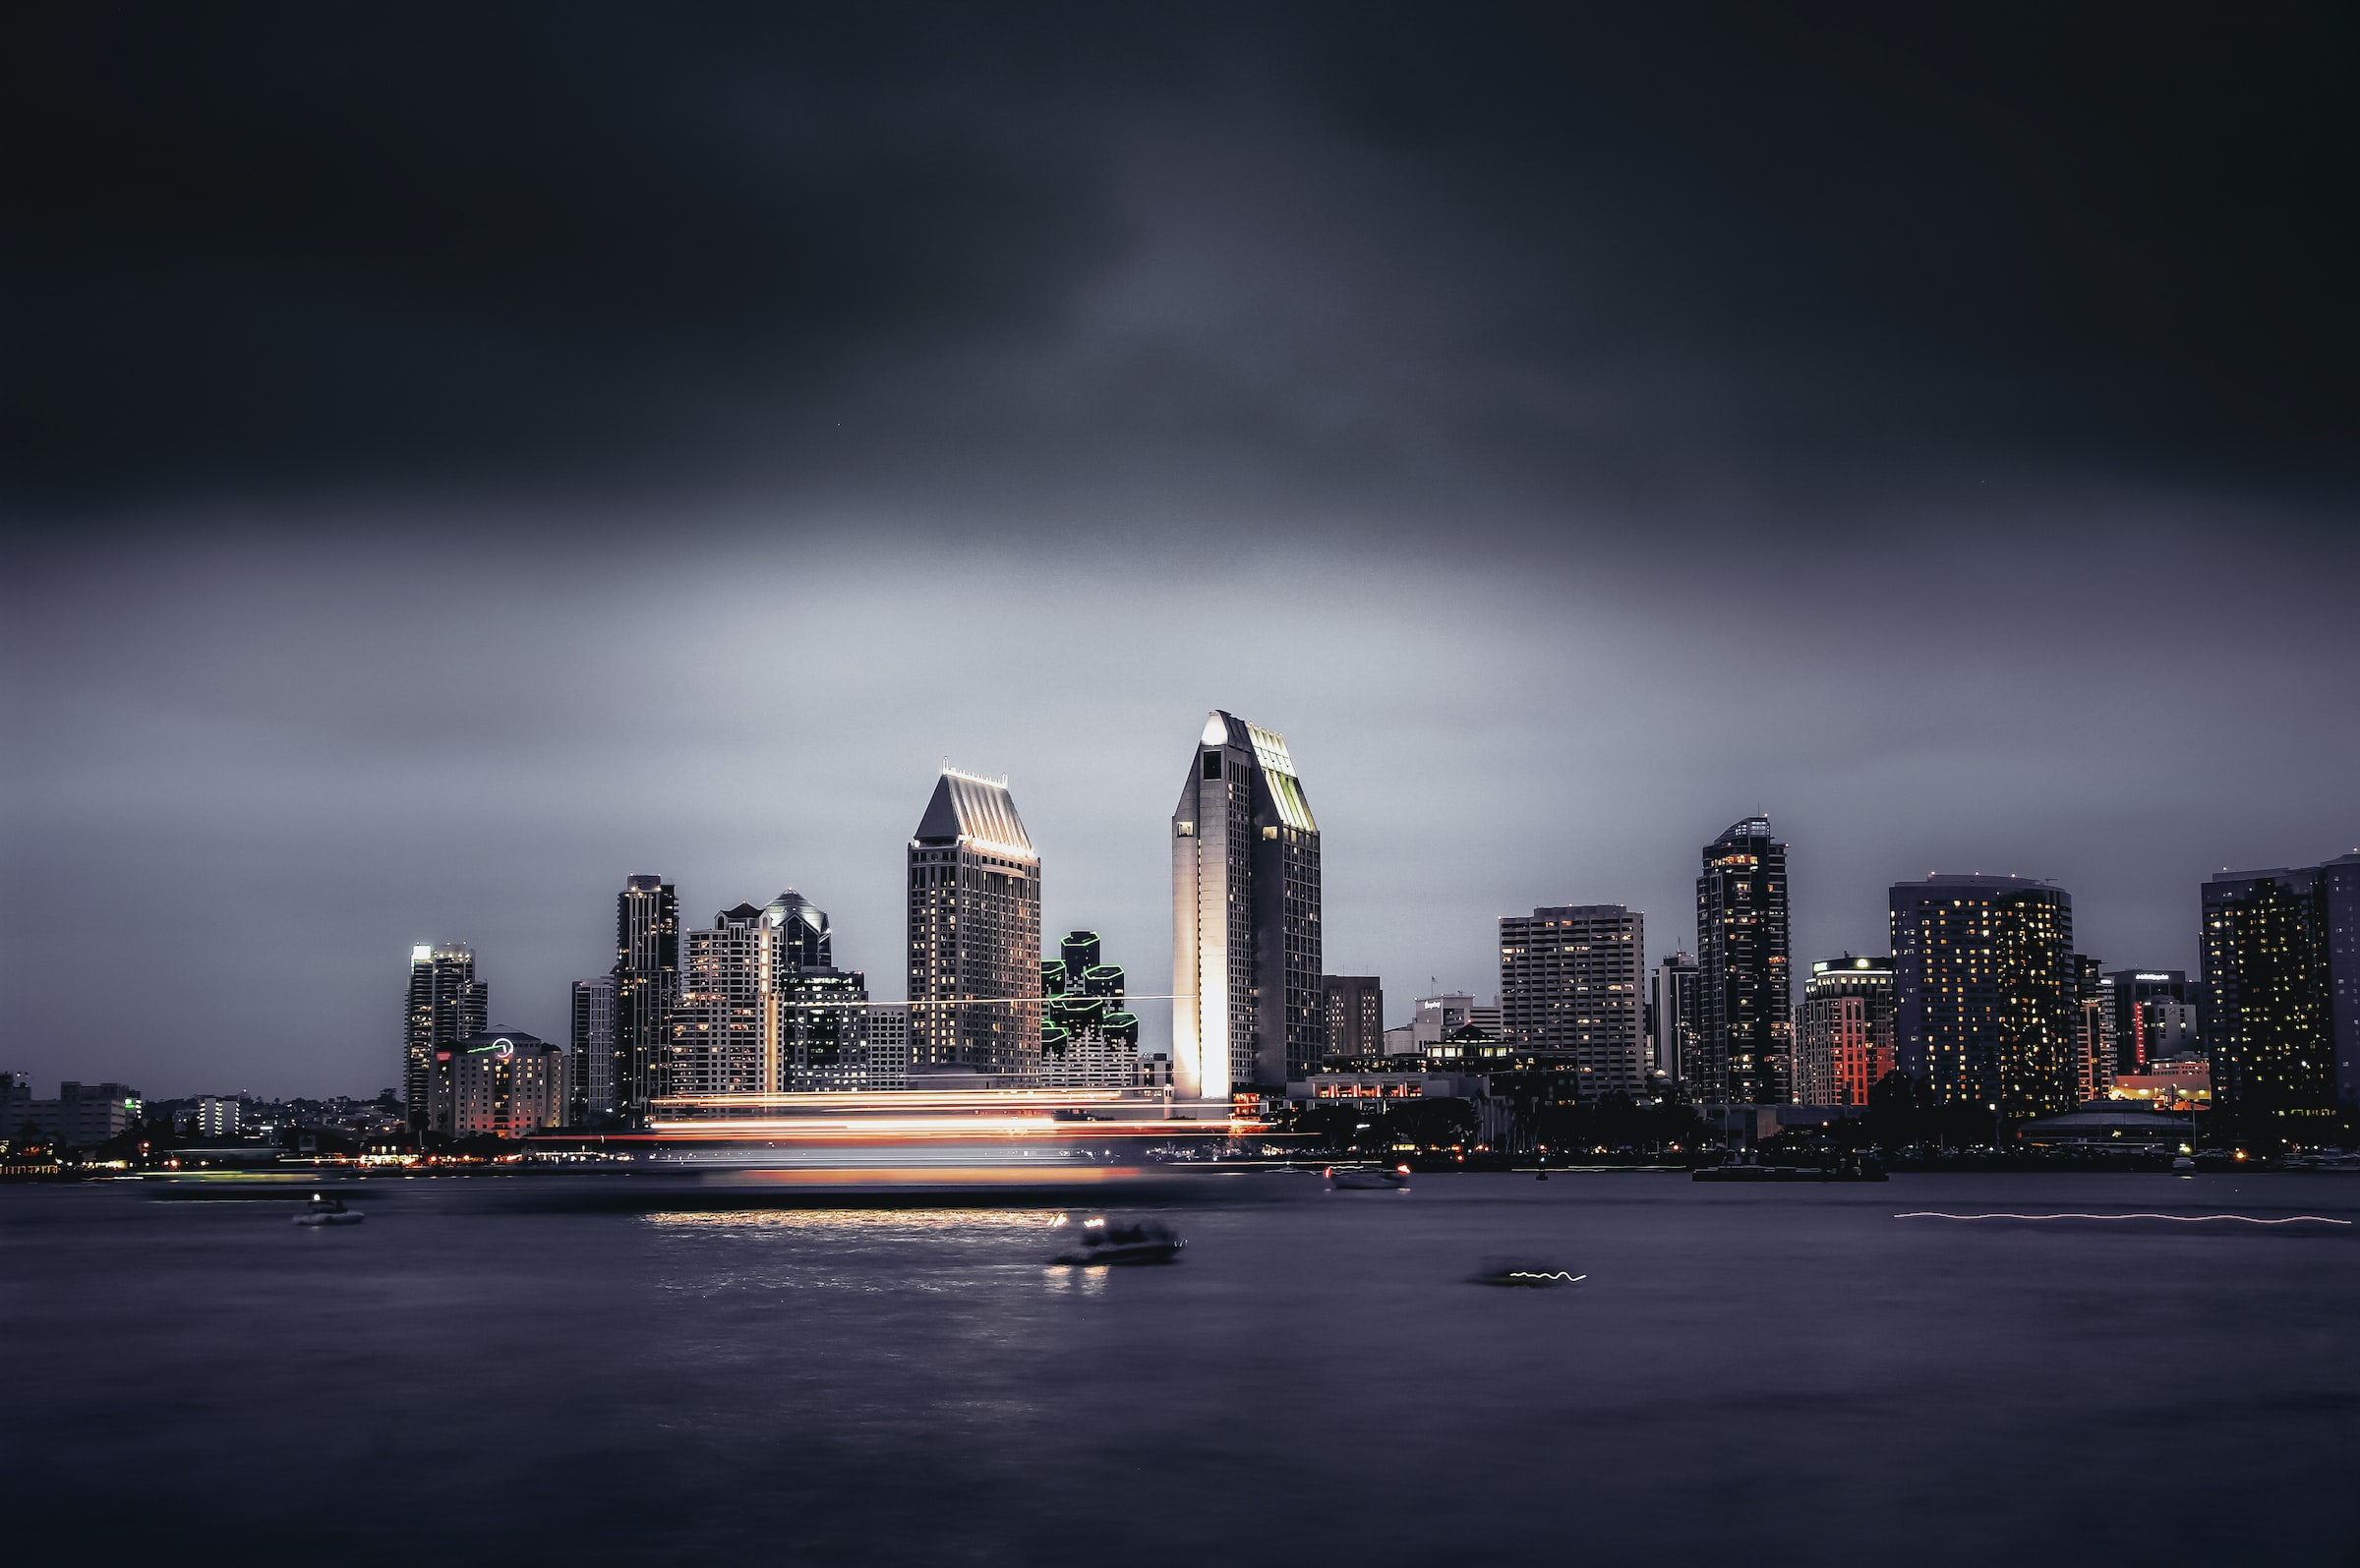 San Diego's downtown skyline is shown at night with motion-blurred objects appearing on the water